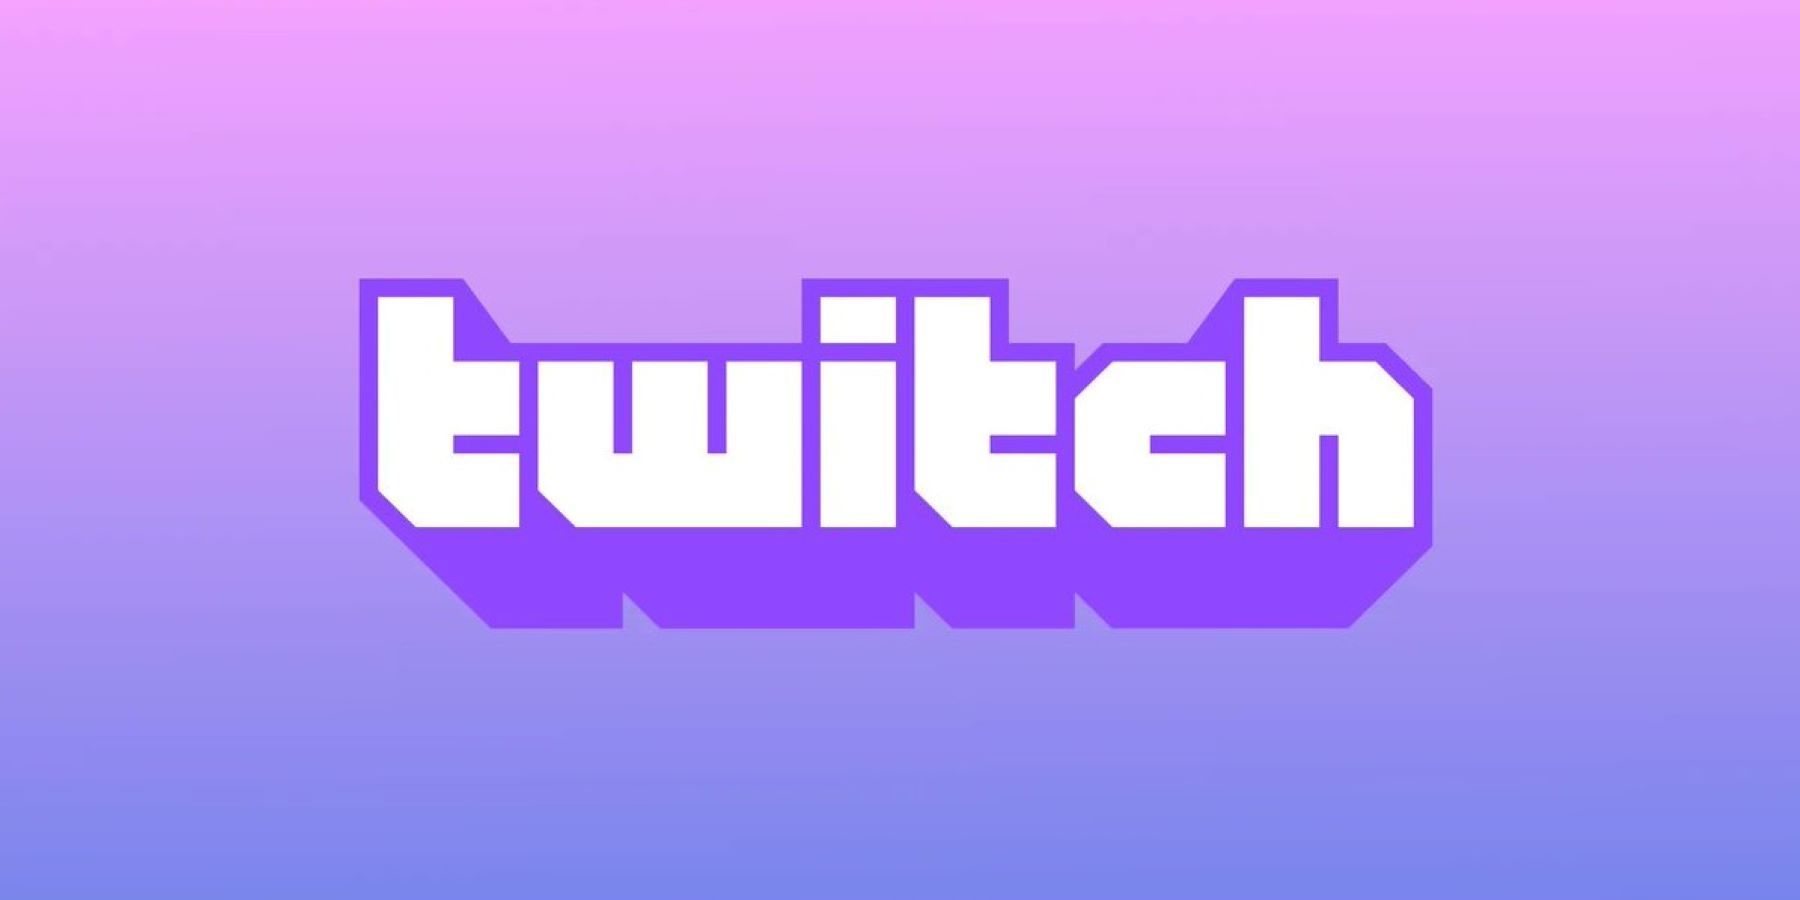 The Twitch logo on a blue and purple background